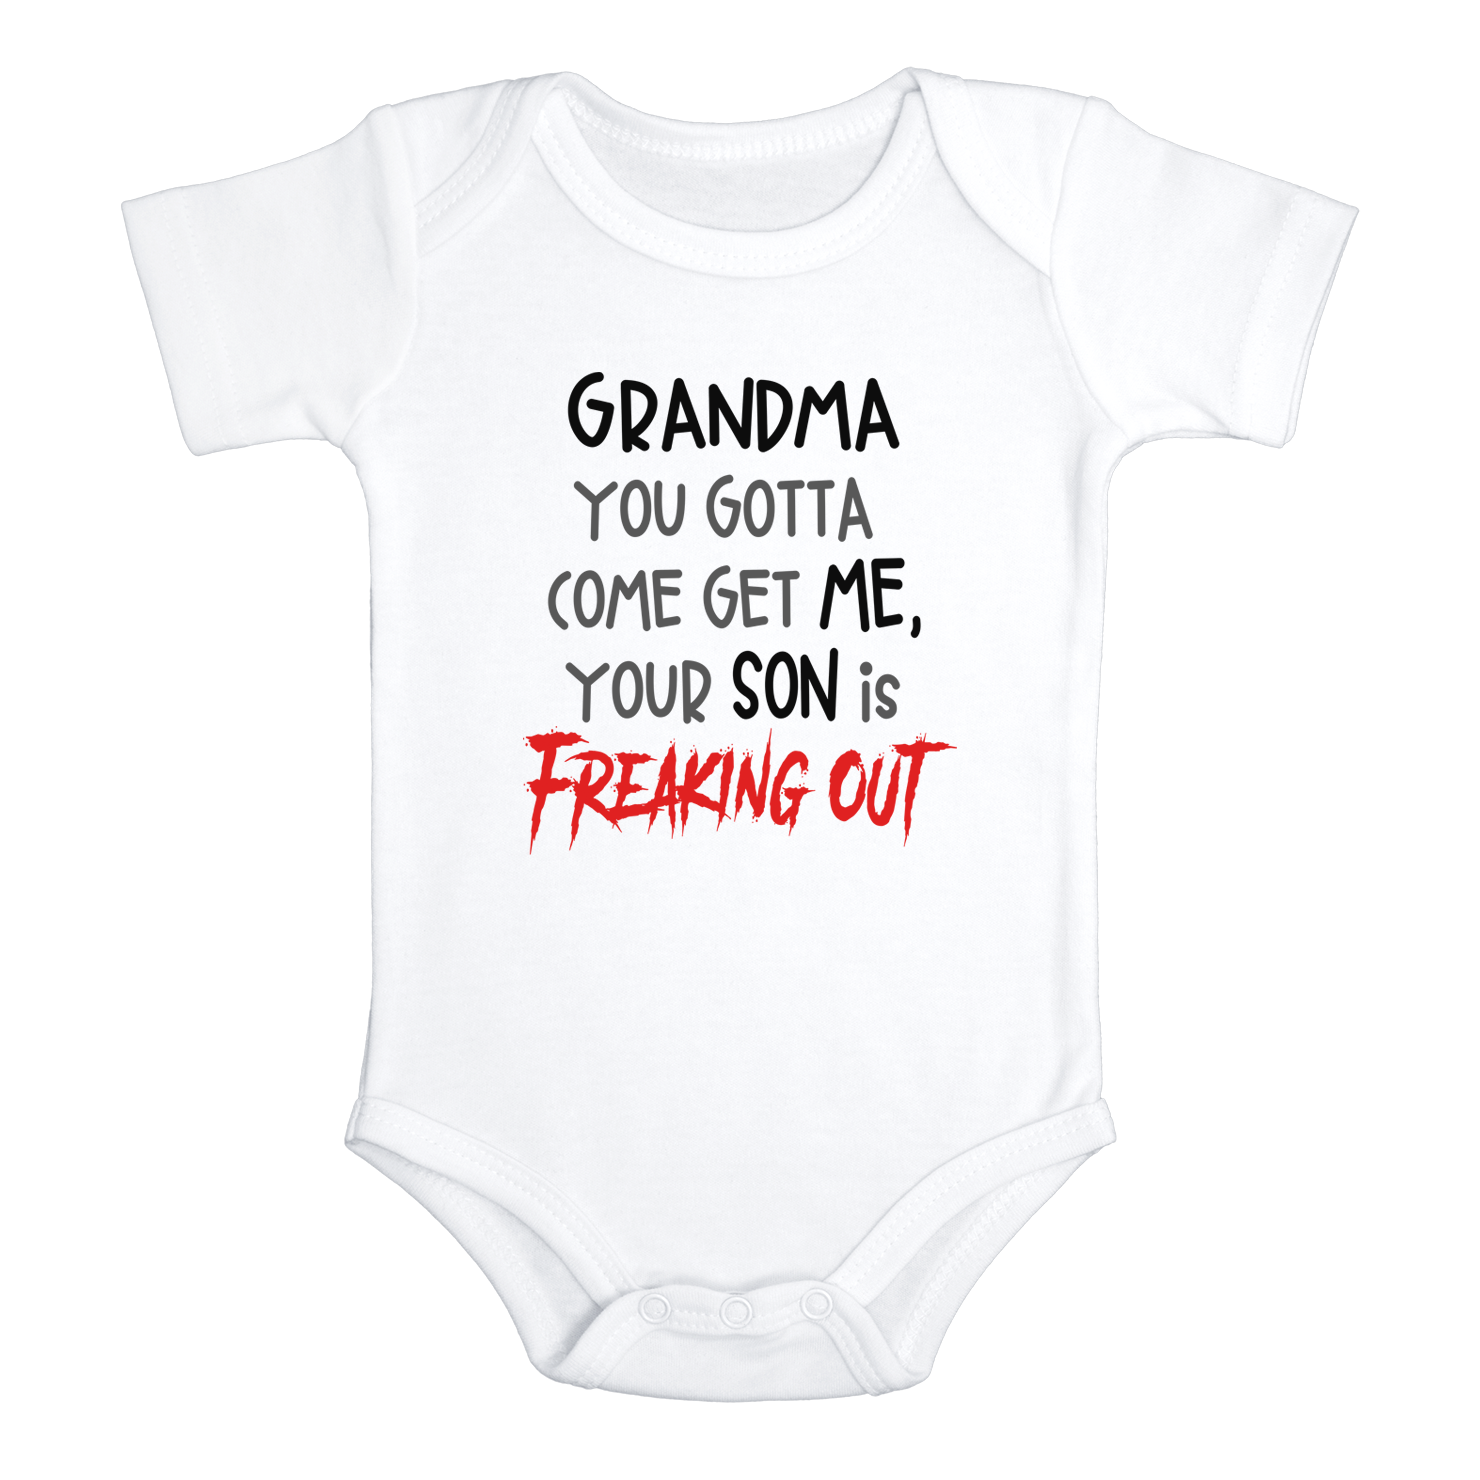 GRANDMA YOU GOTTA COME GET ME YOUR SON IS FREAKING OUT! - HappyAddition